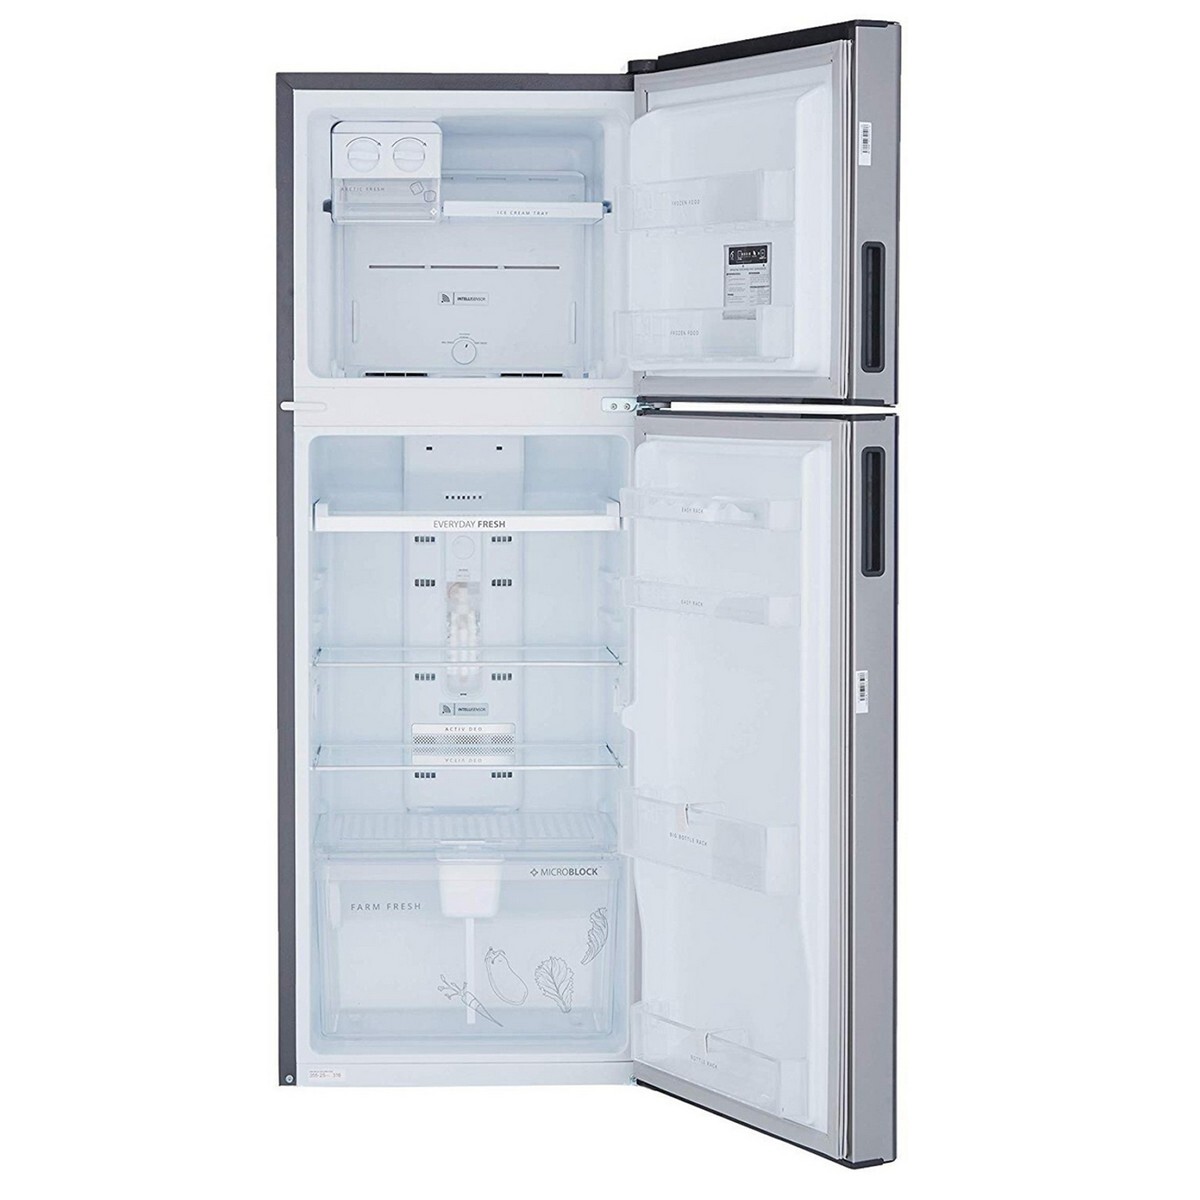 Whirlpool 265 L 3 Star Frost Free Inverter Double Door Refrigerator IF INV CNV 278 COOL ILLUSIA